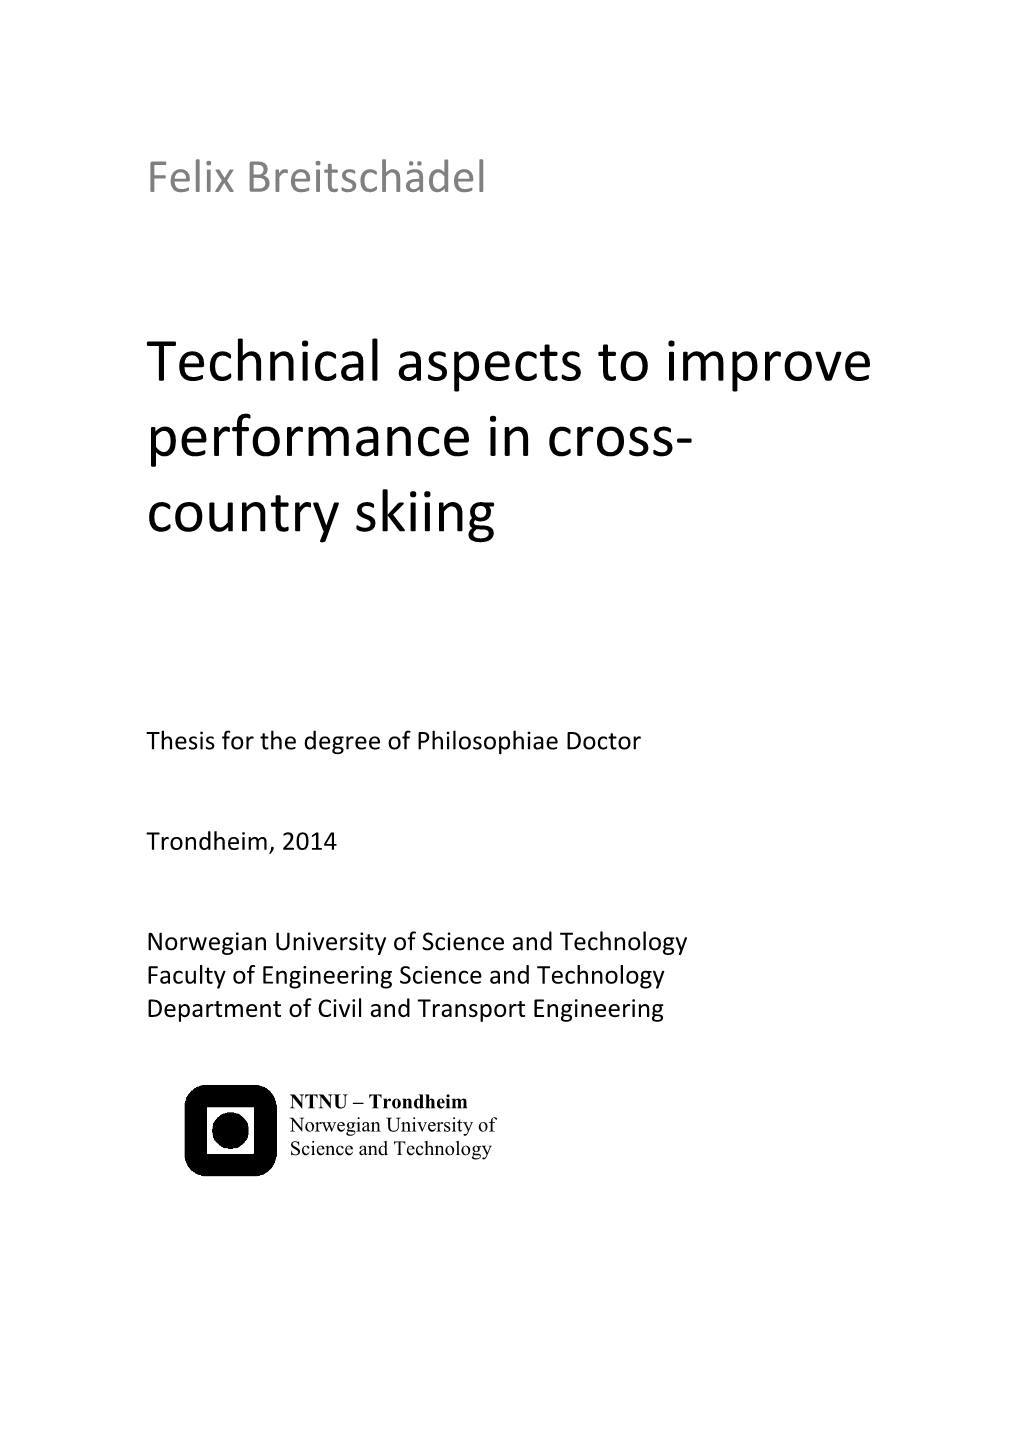 Technical Aspects to Improve Performance in Cross- Country Skiing